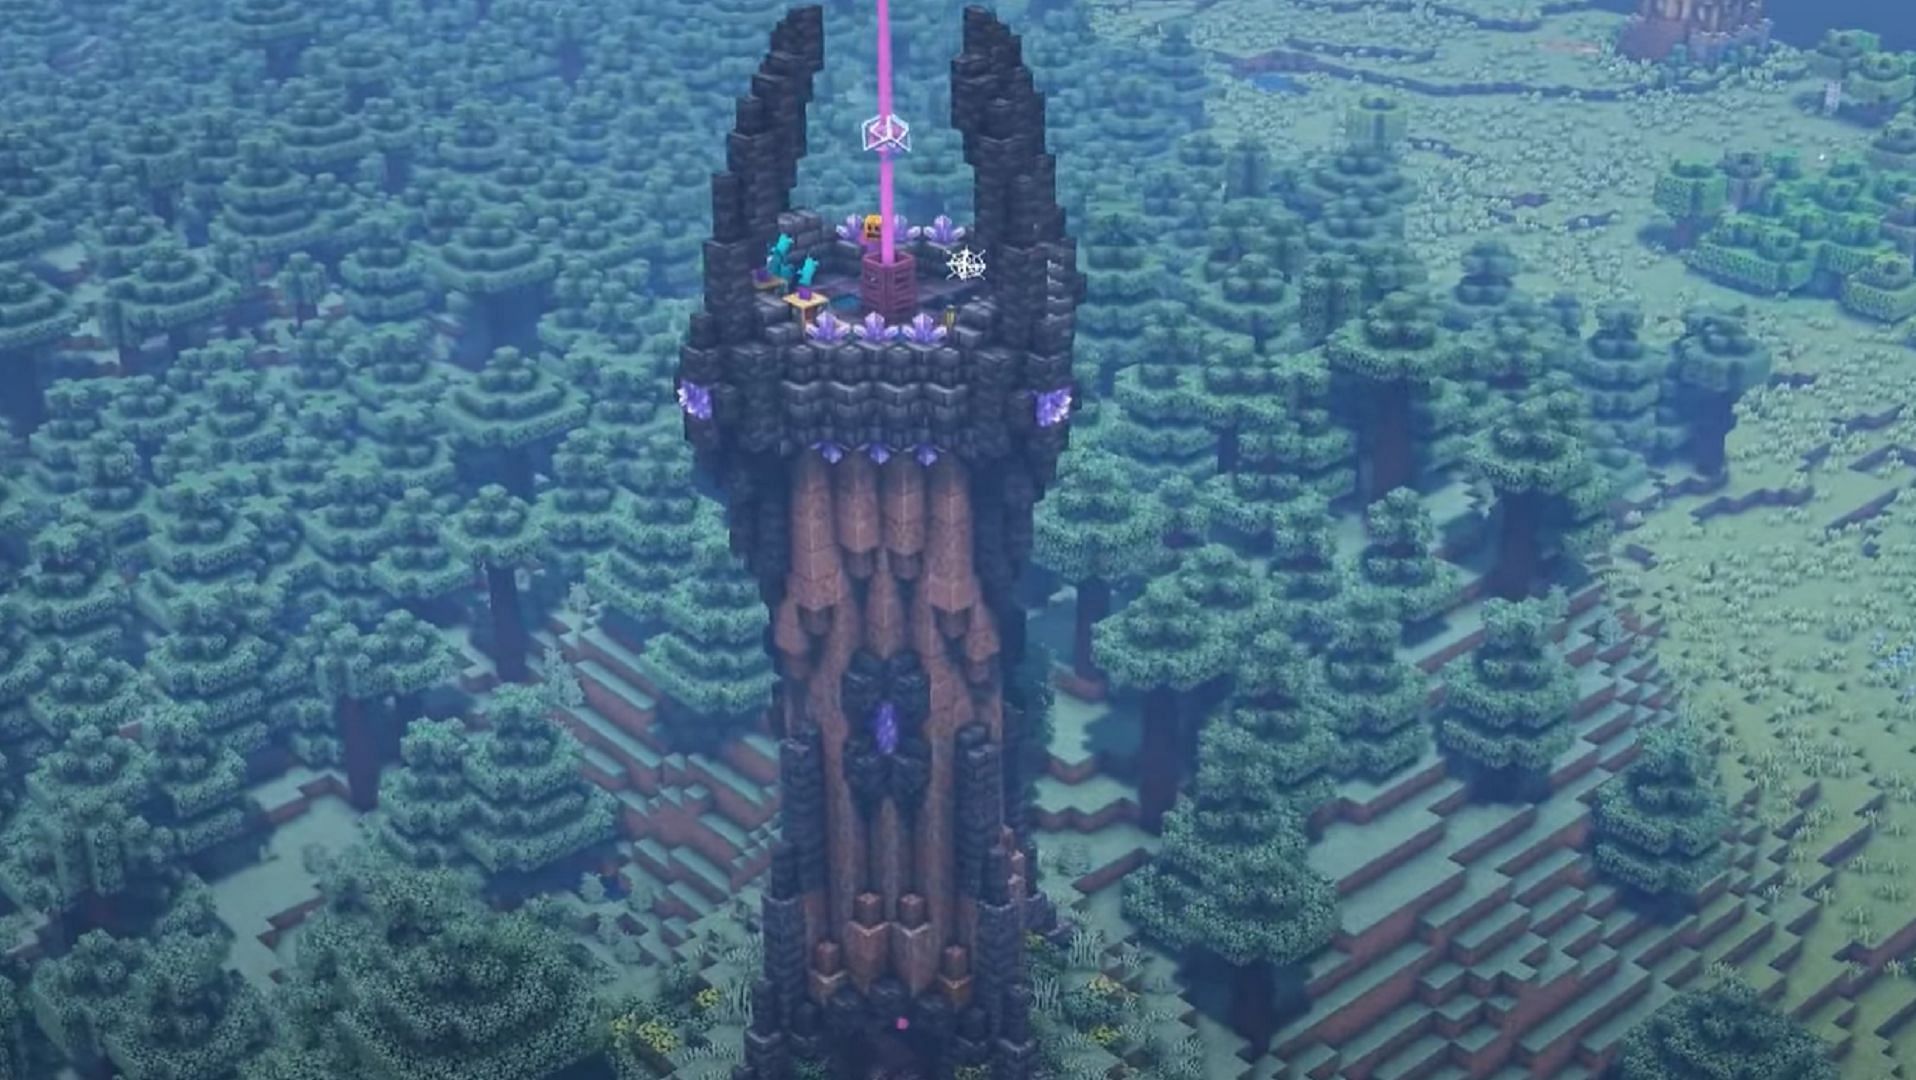 This Minecraft build strikes a sinister tone as it reaches into the sky (Image via BrokenPixelSK/YouTube)